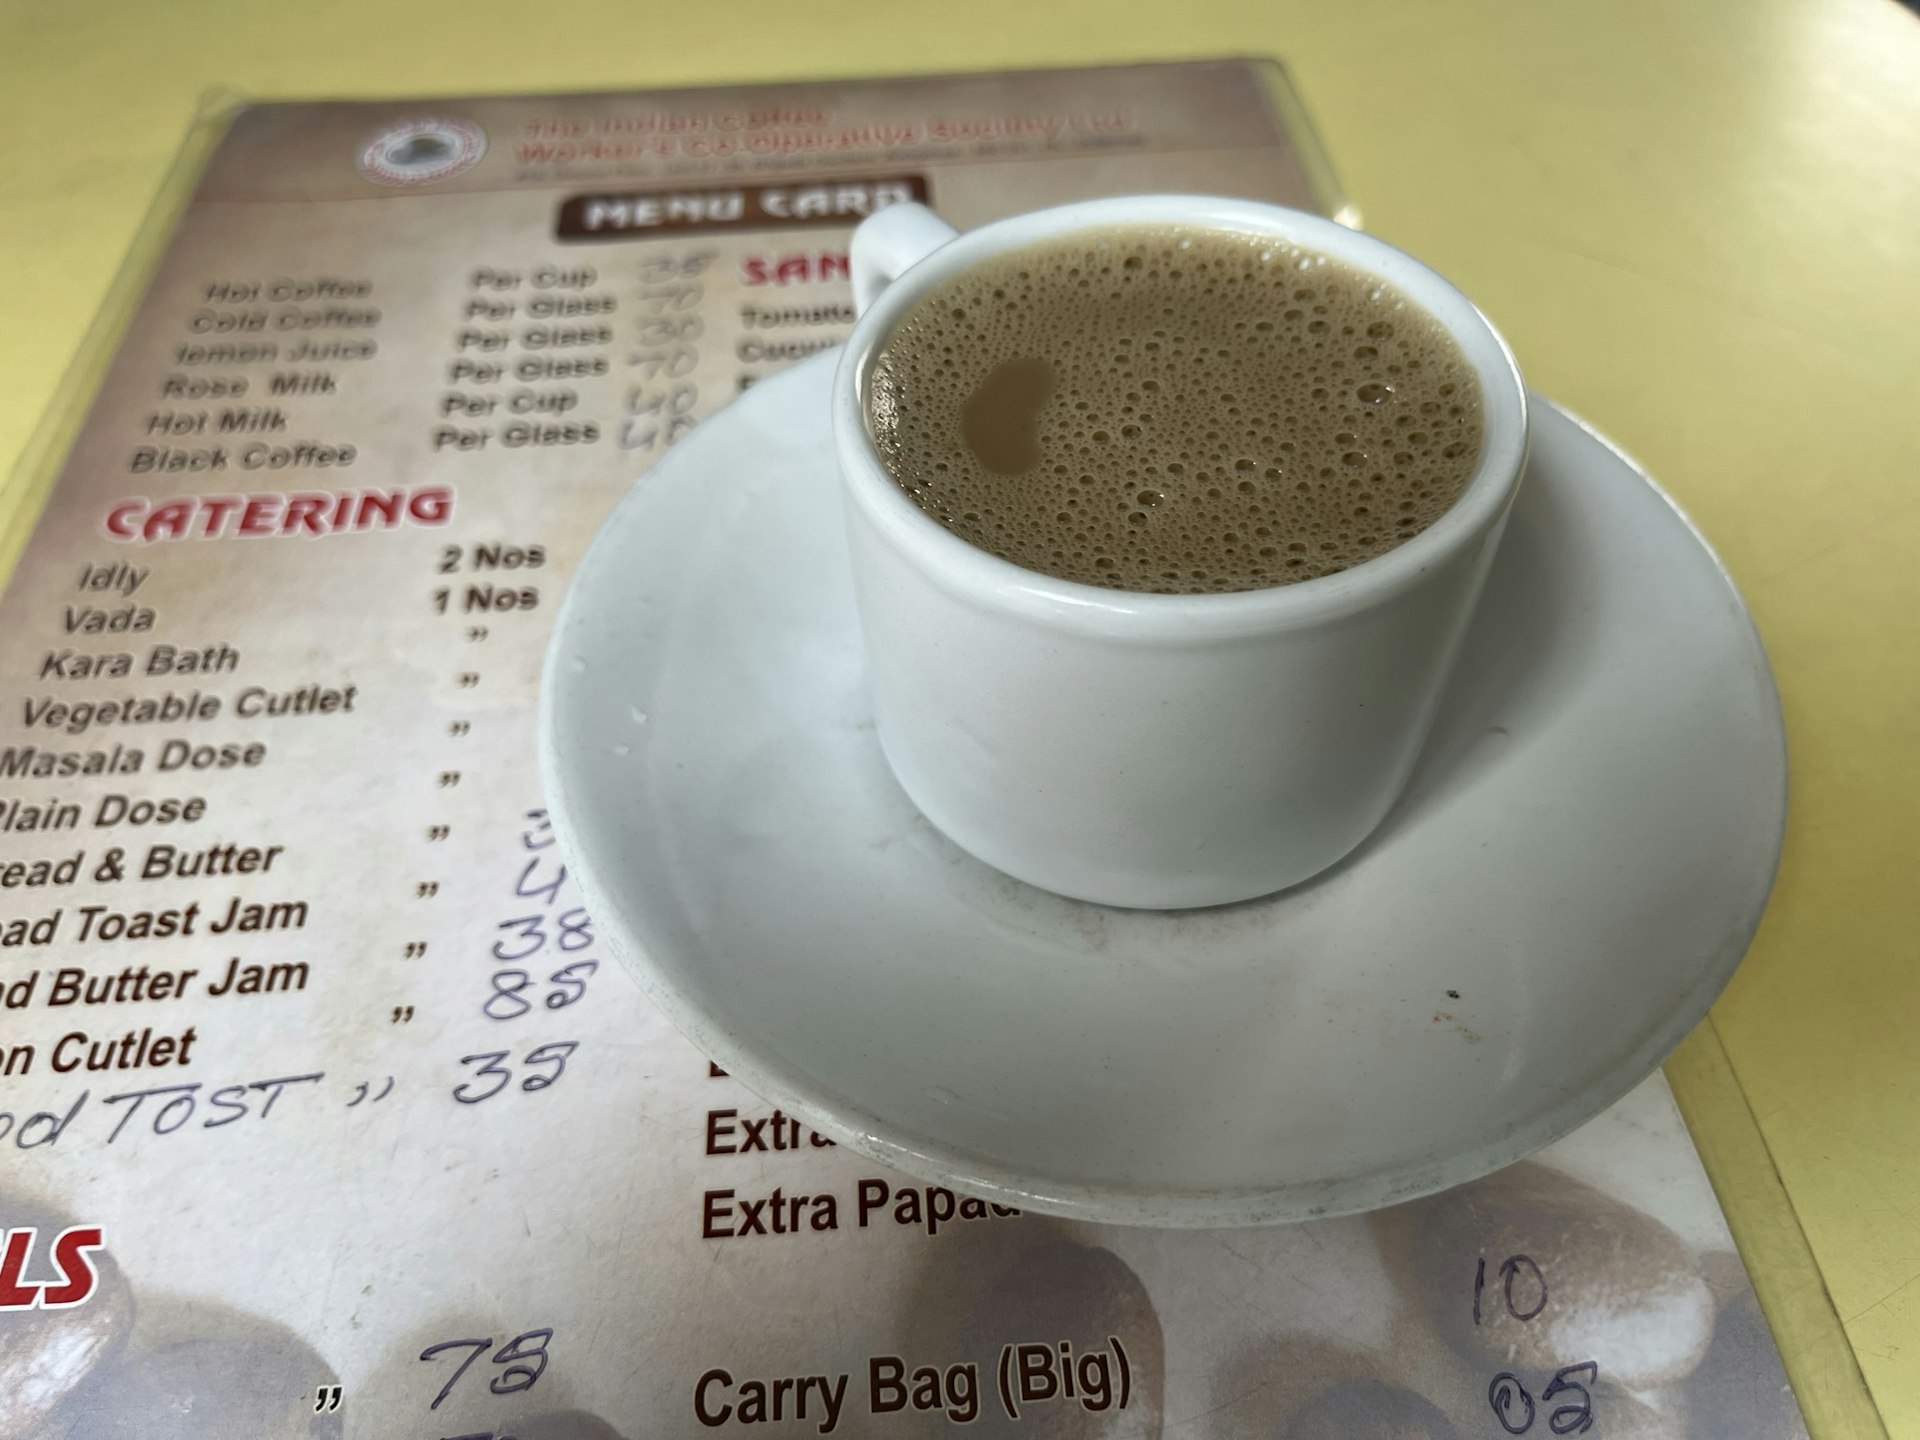 A filter coffee in a cup with saucer placed on a menu